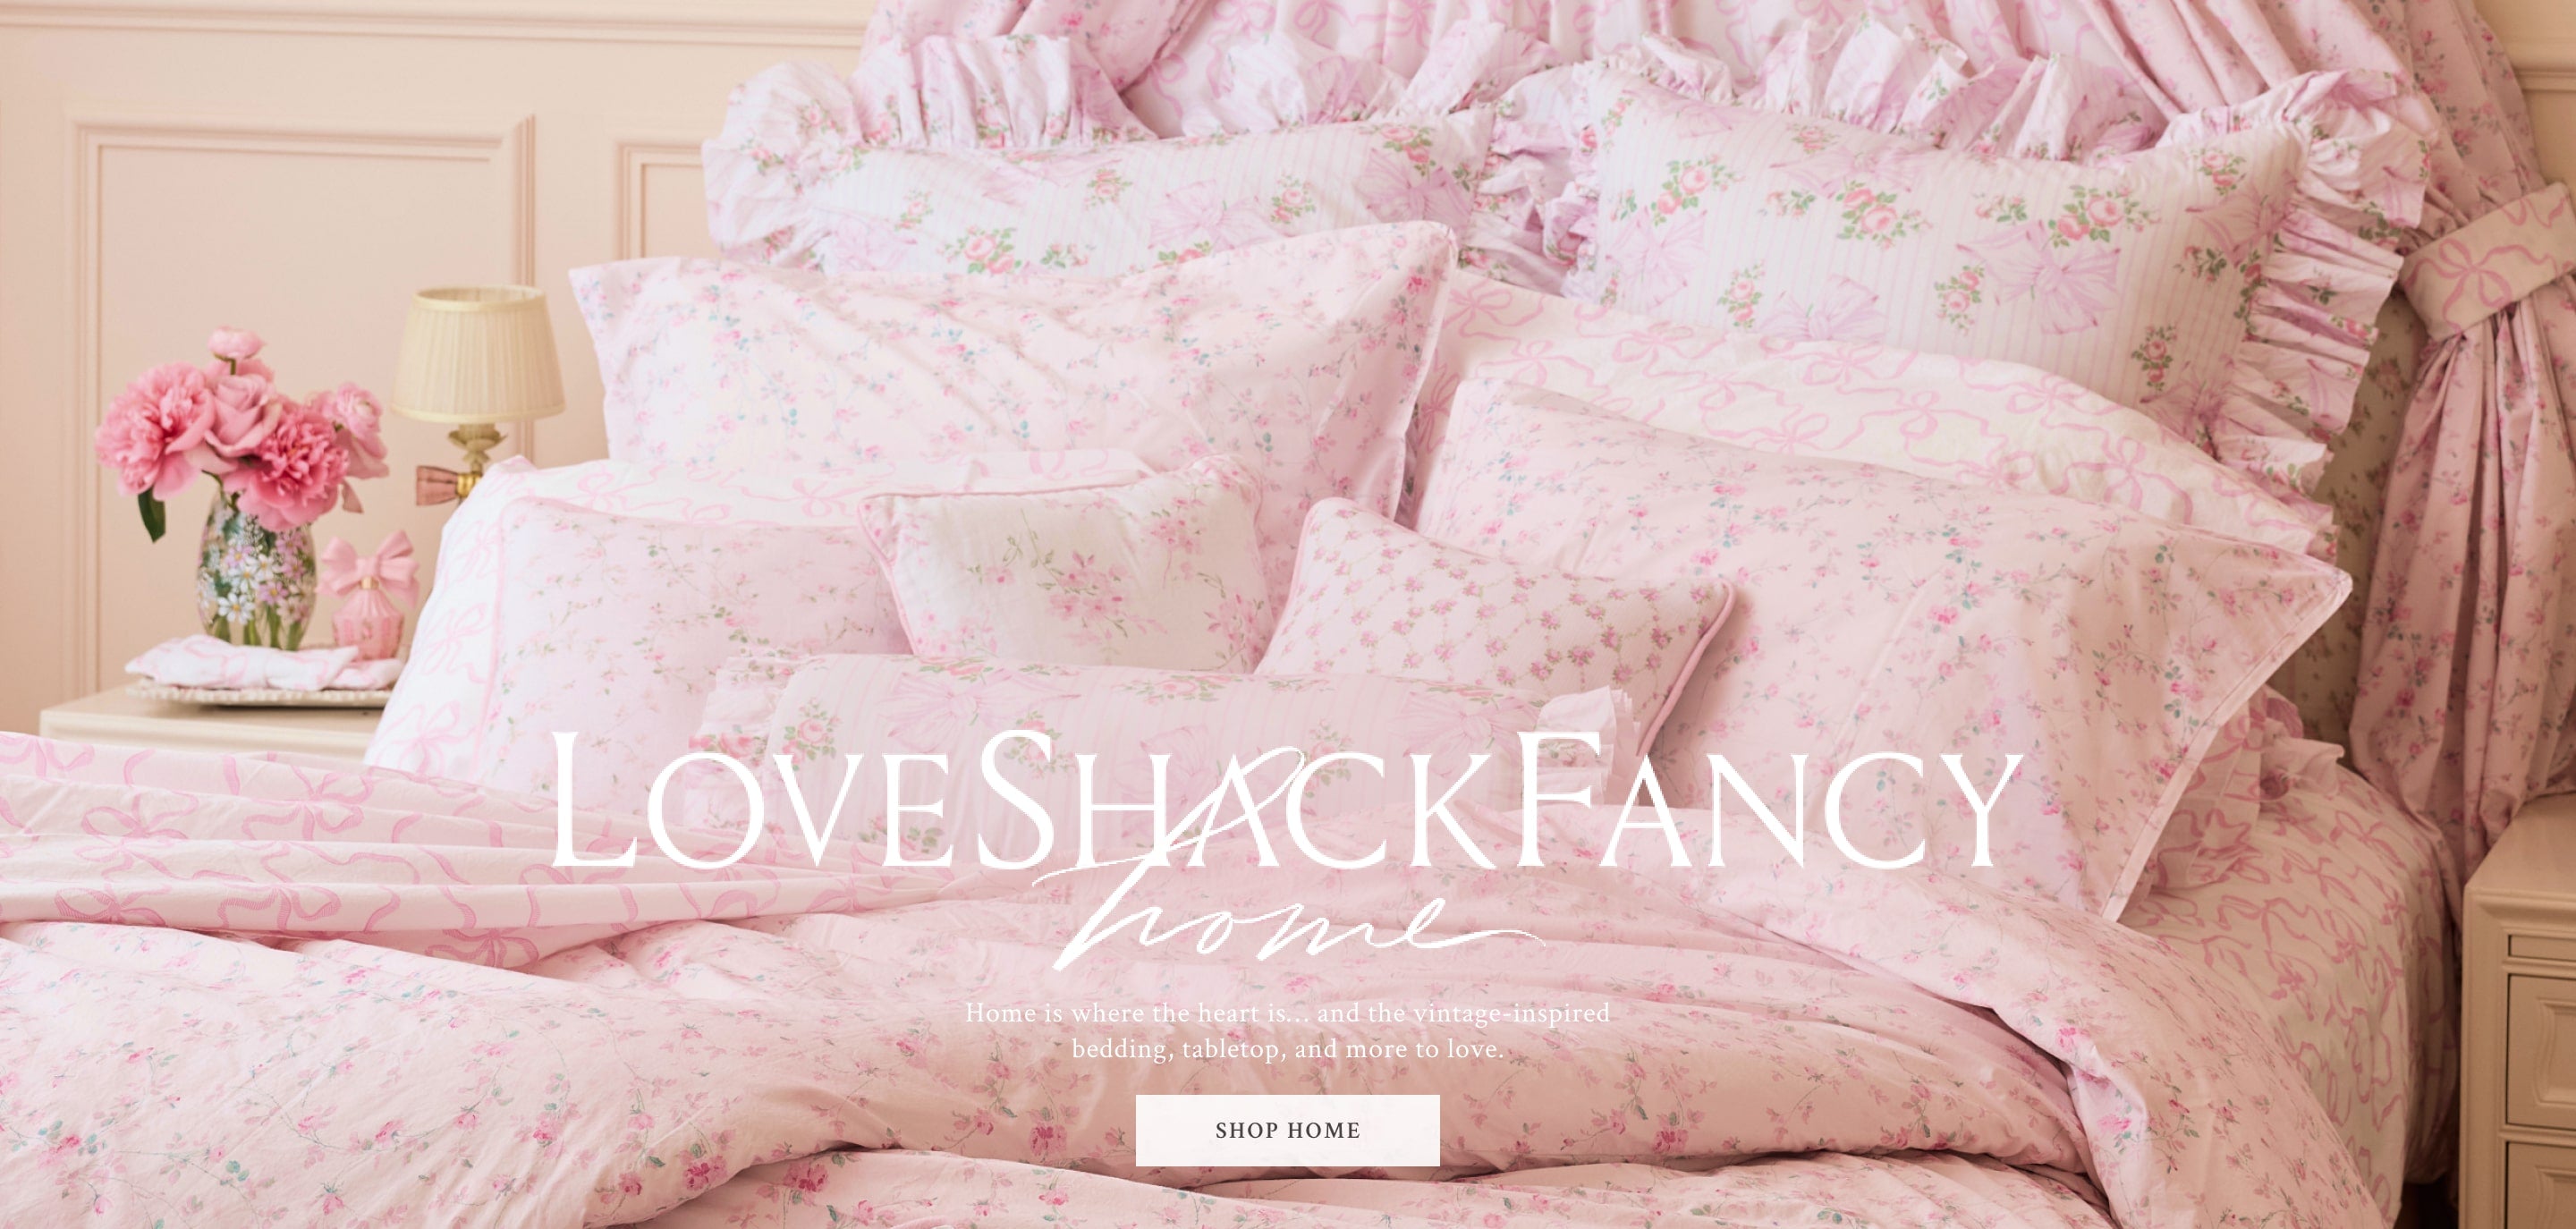 A bed with LoveShackFancy pillows, sheets, and covers. Shop Home.